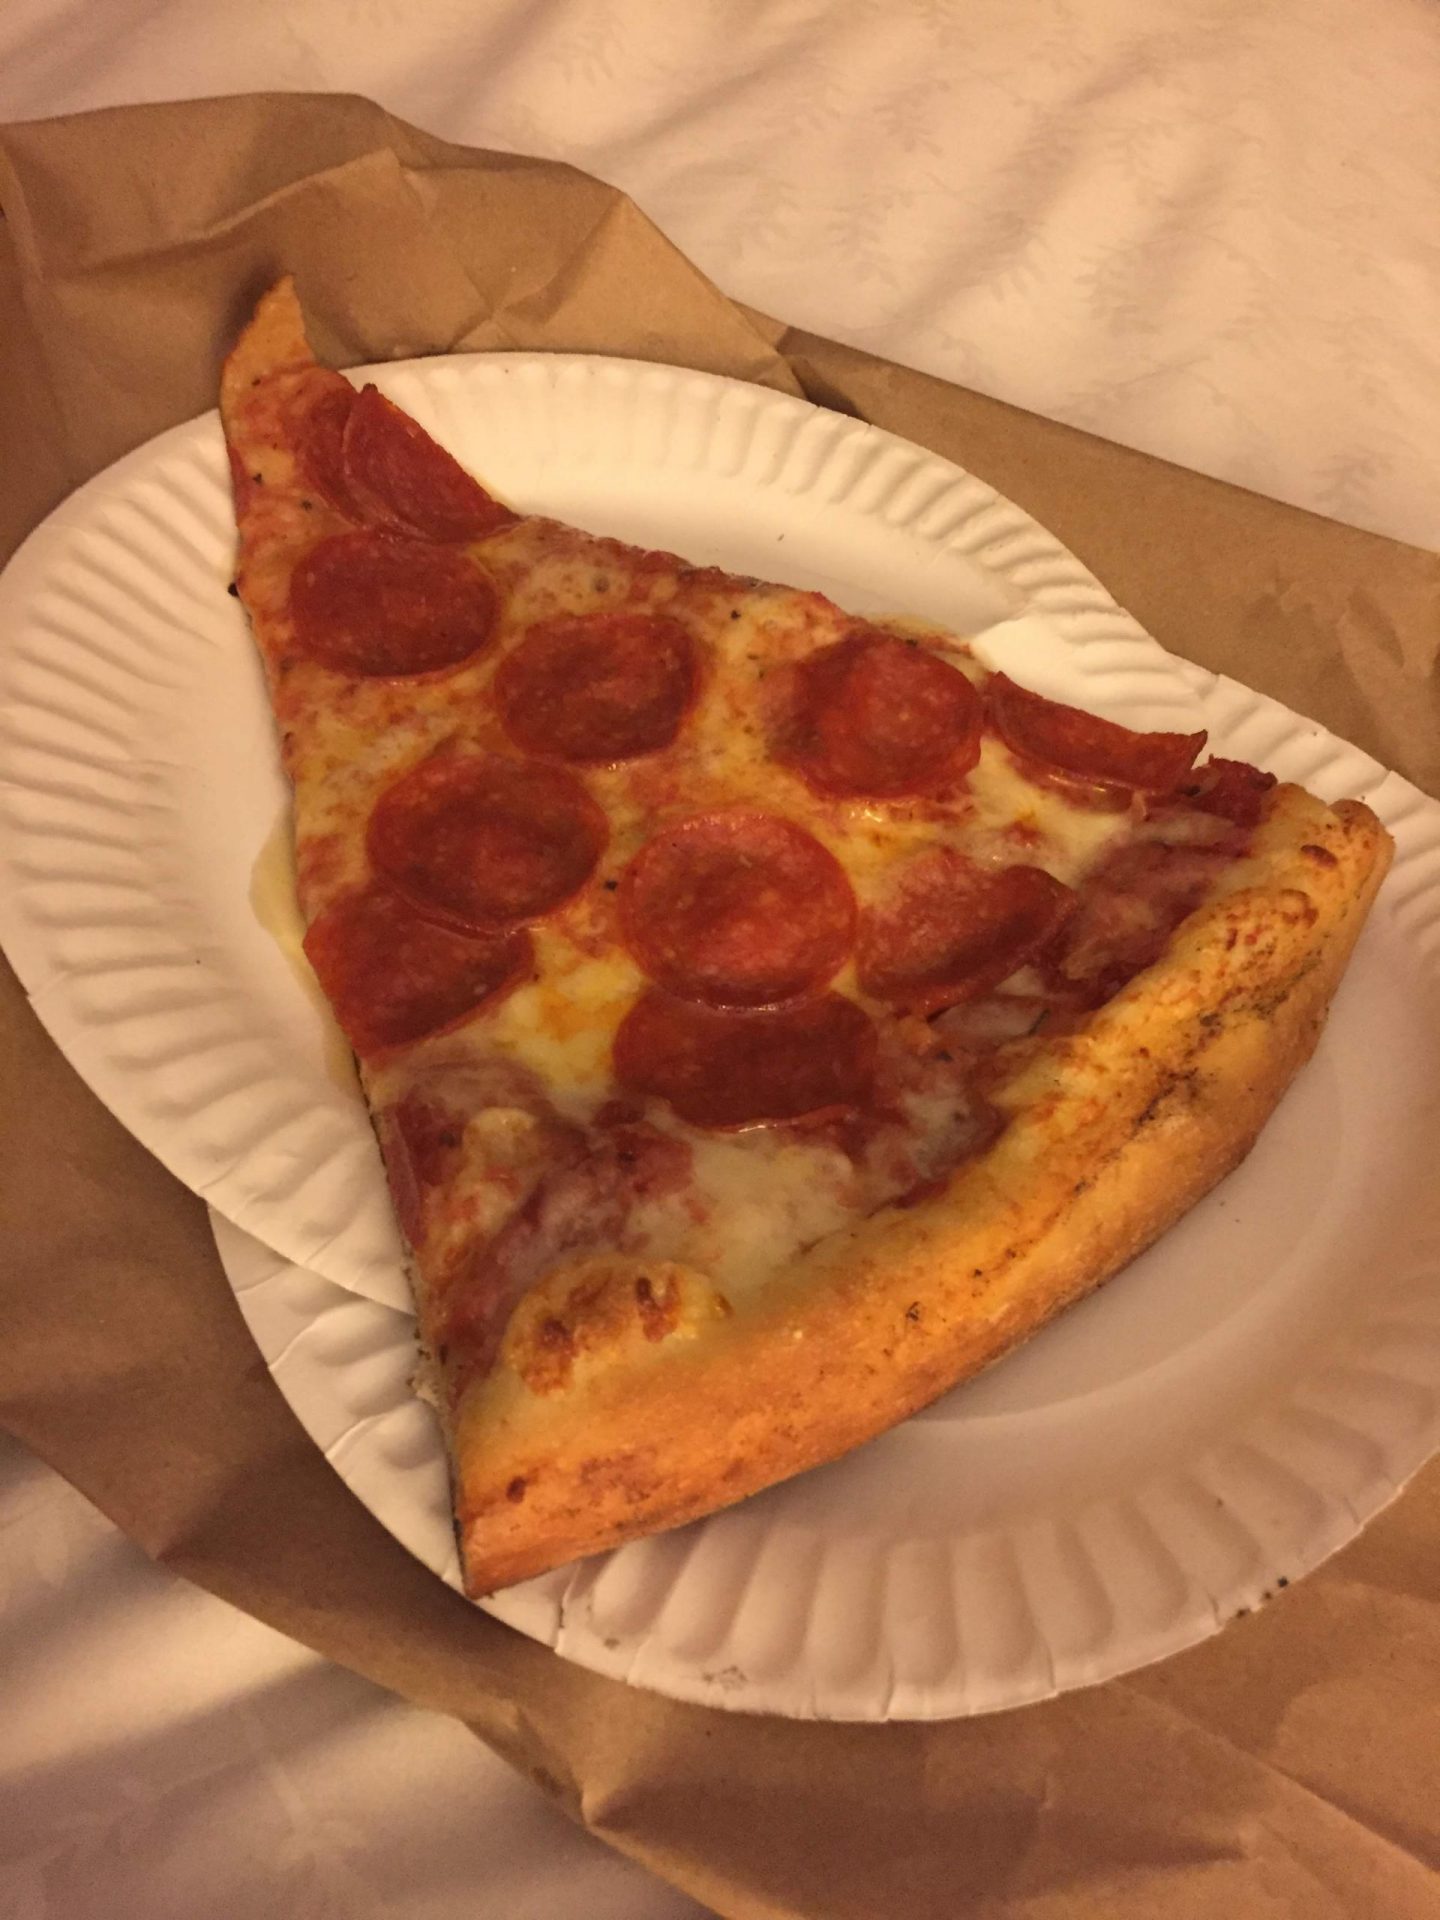 Pepperoni pizza slice from New York City